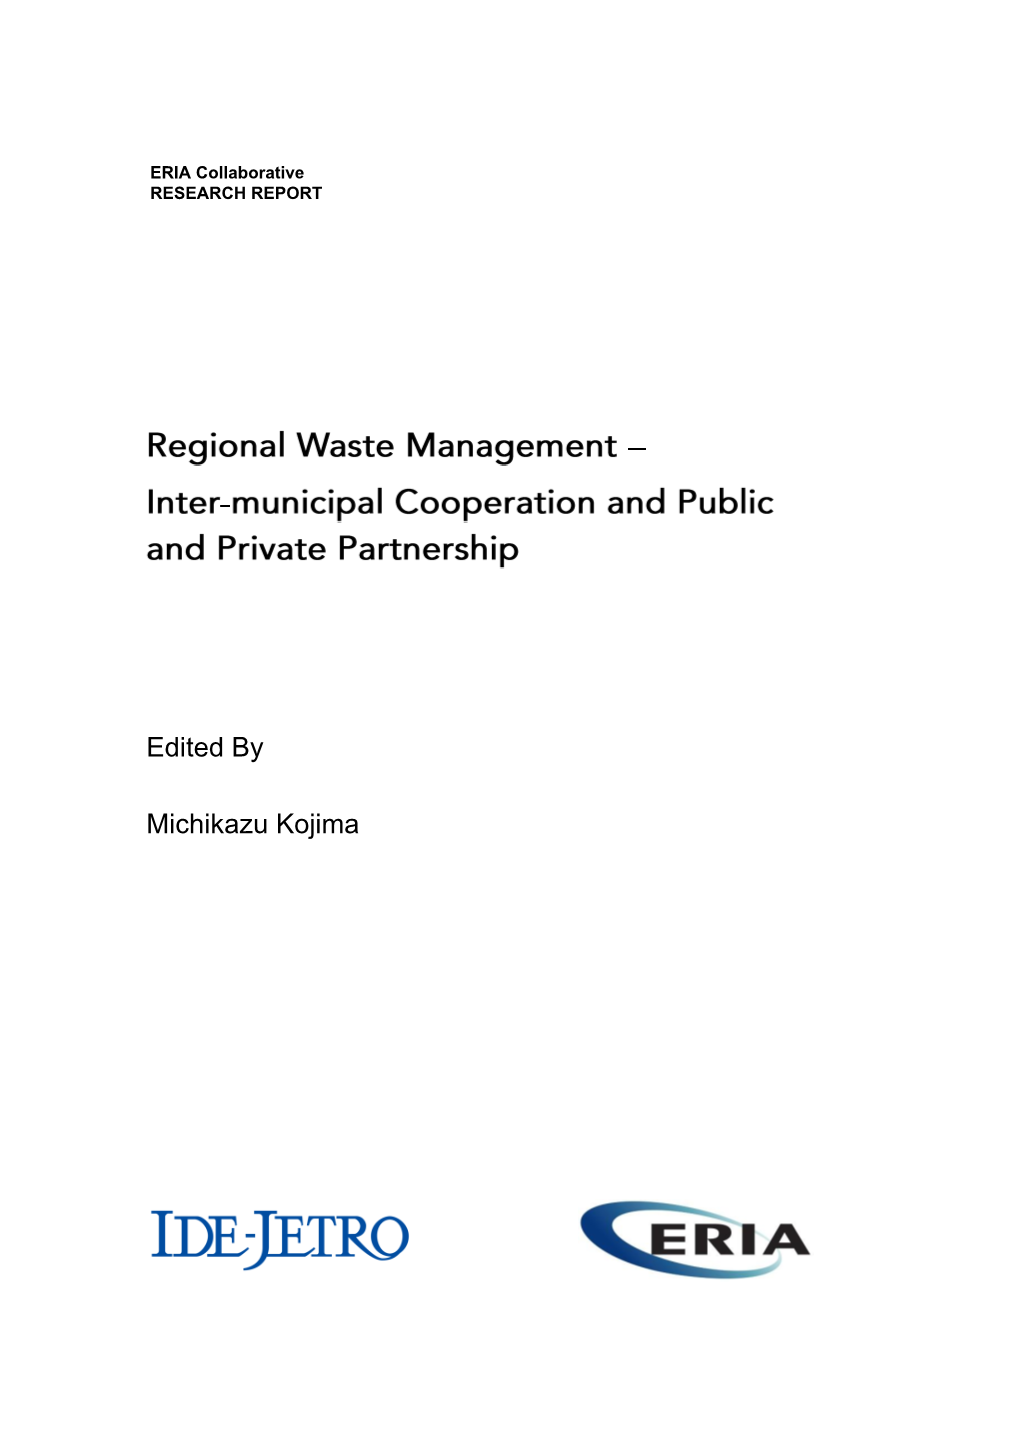 Regional Waste Management – Inter-Municipal Cooperation and Public and Private Partnership